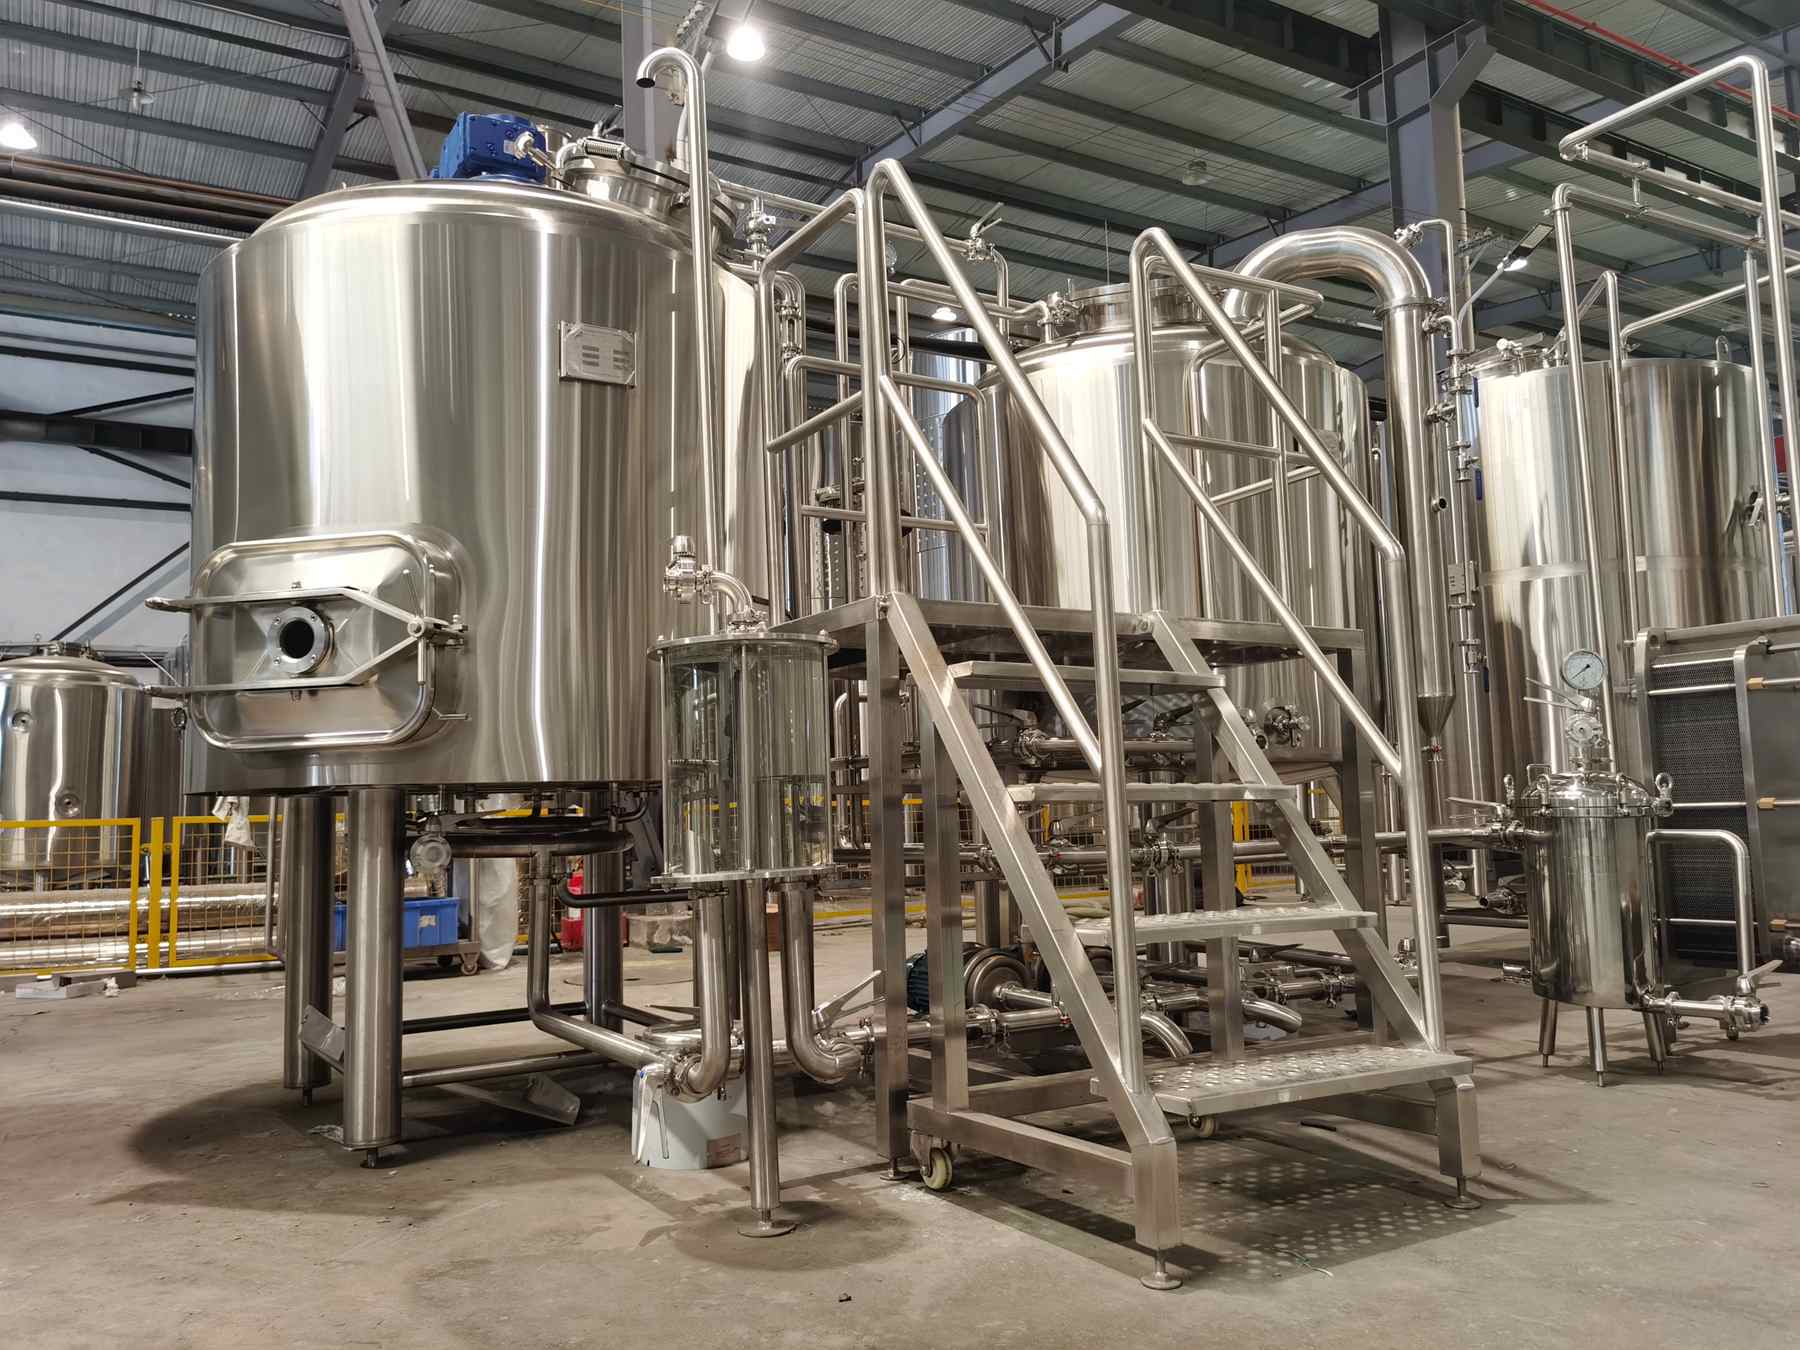 What equipment do I need for a craft beer brewing system?